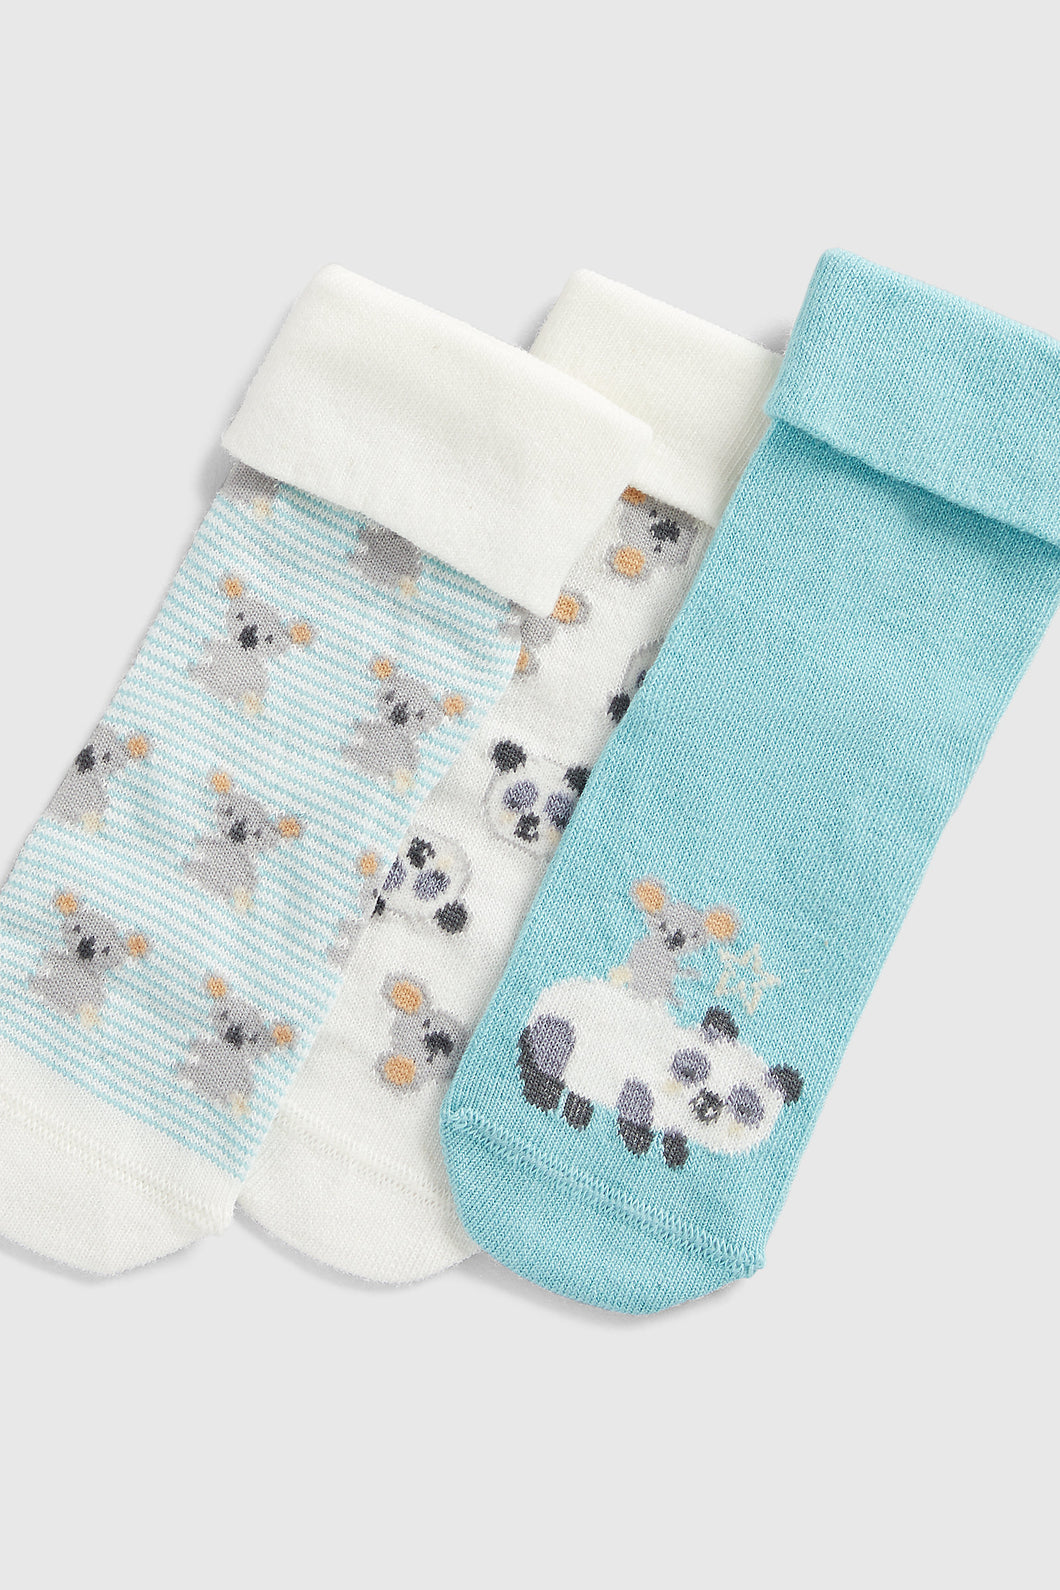 Mothercare Turn-Over-Top Baby Socks - 3 Pack